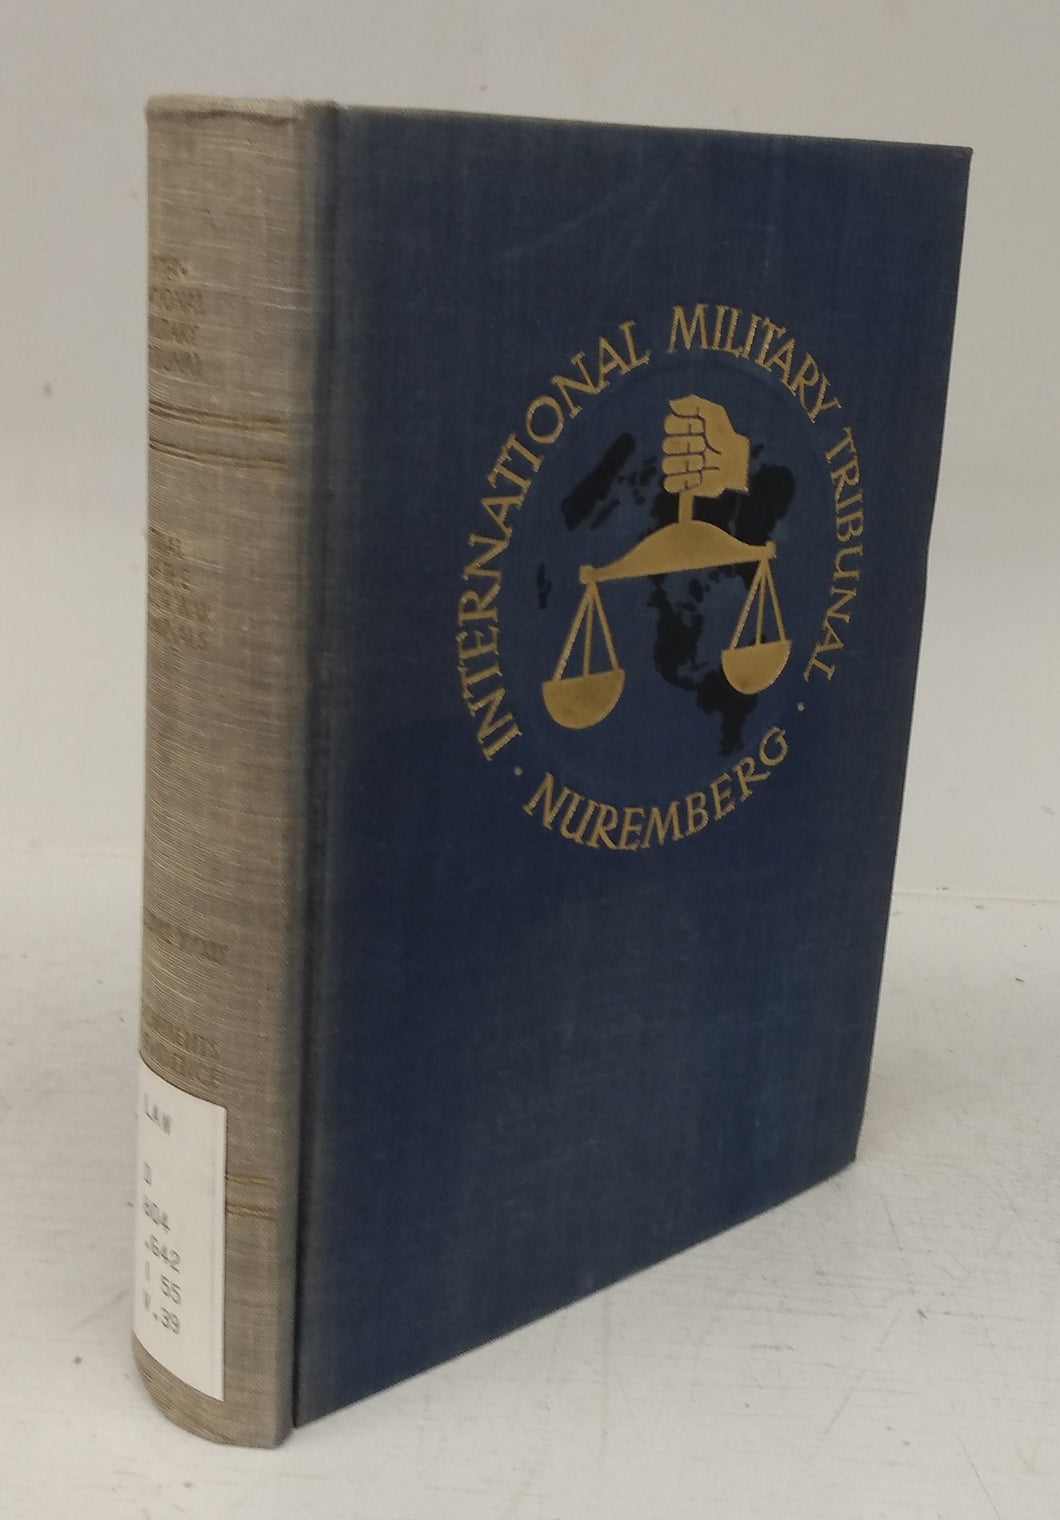 Trial of the Major War Criminals before the International Military Tribunal, Nuremberg, 14 November 1945 - 1 October 1946 (Volume XXXIX - Documents and Other Material in Evidence Nos 1218 - RF to JN)